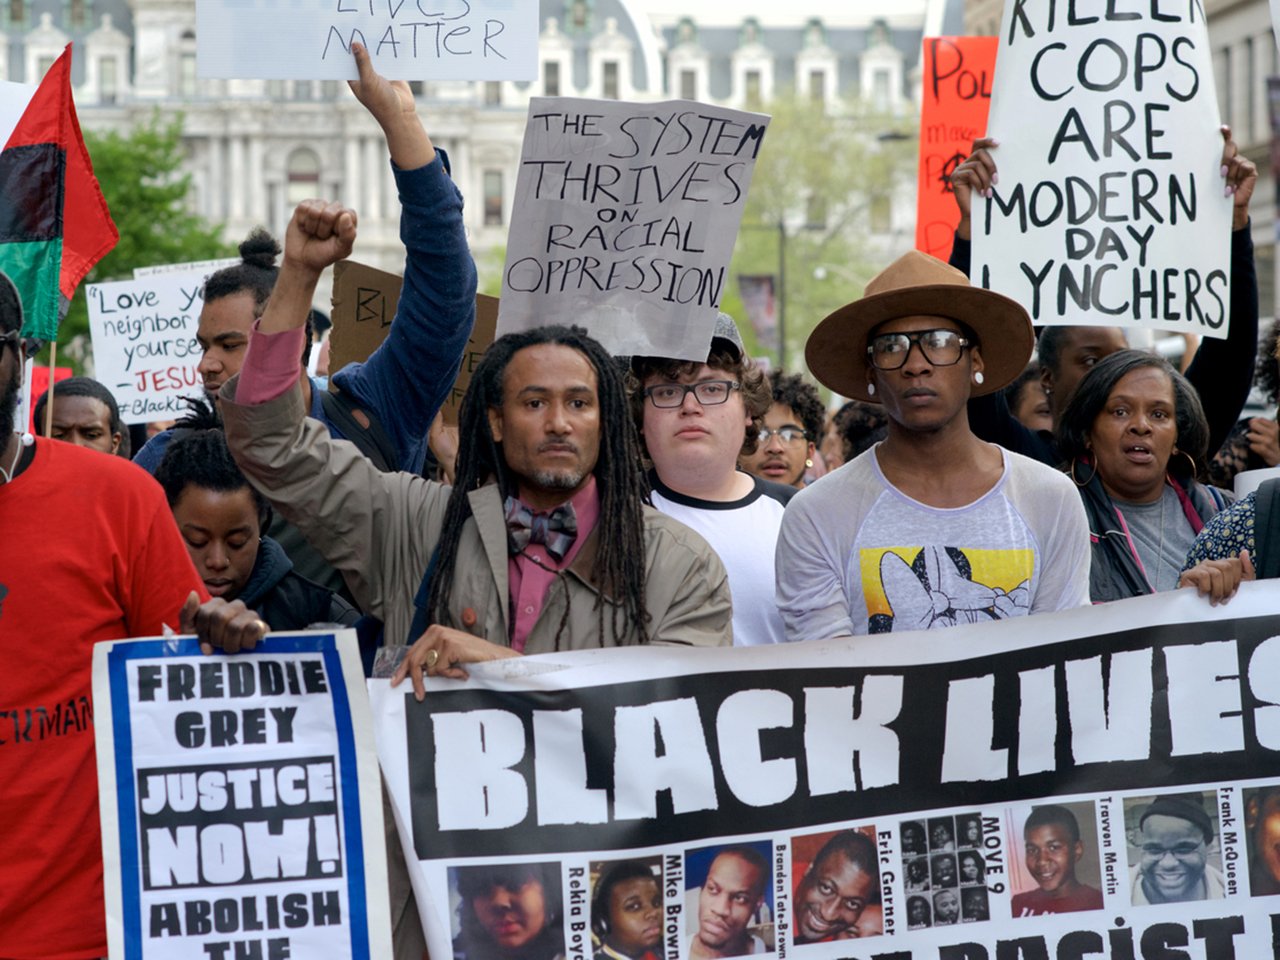 Protestors in support of the national 'Black Lives Matter' movement gathered at Dillworth Plaza in Philadelphia on April 30